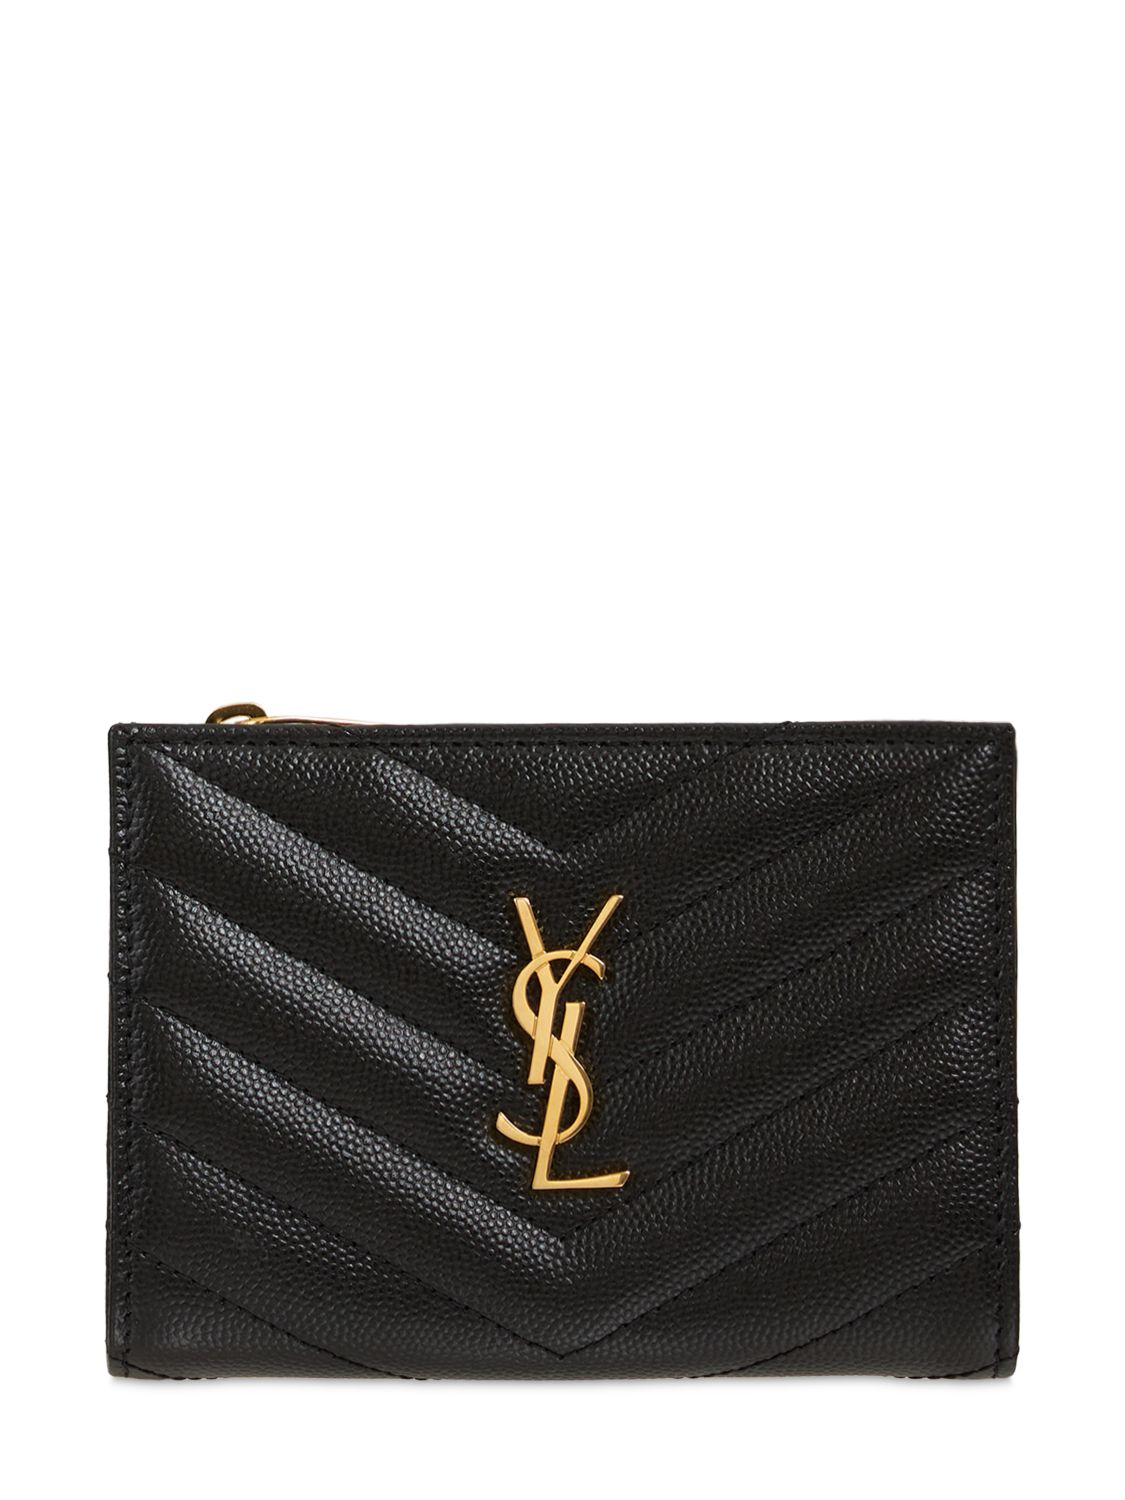 Ysl Leather Wallet